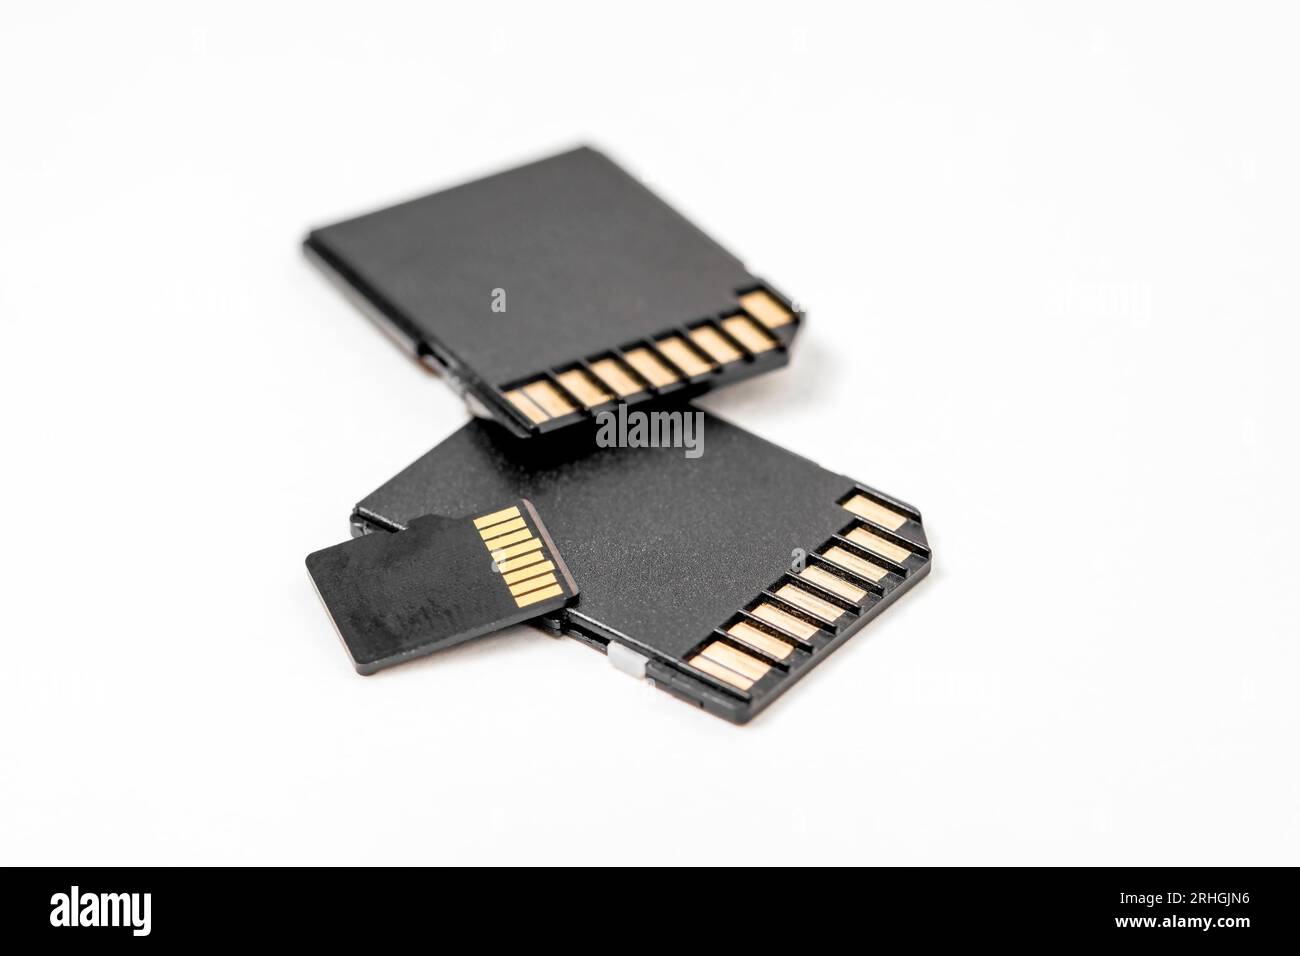 Close-up of black memory cards on a white background. SD memory card to use when taking pictures on your digital camera. Stock Photo